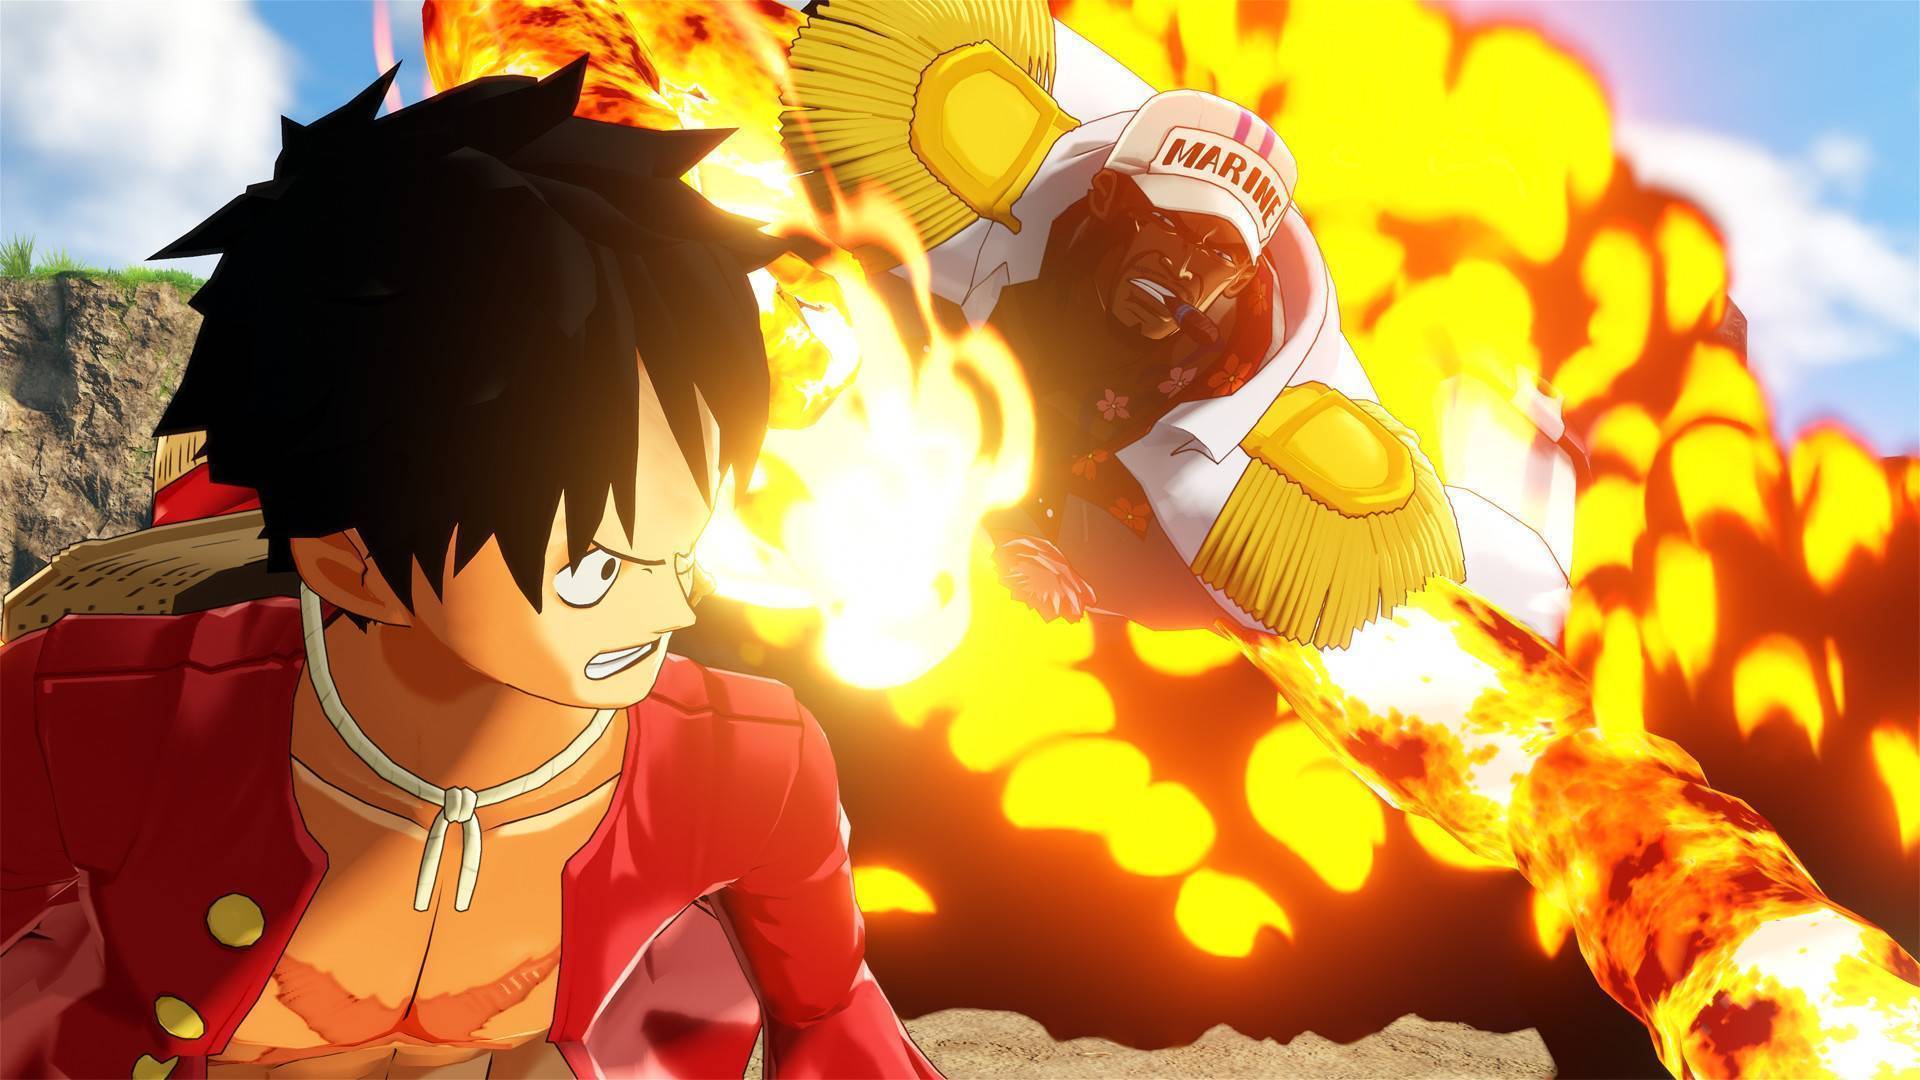 ONE PIECE World Seeker (PS4) cheap - Price of $15.63